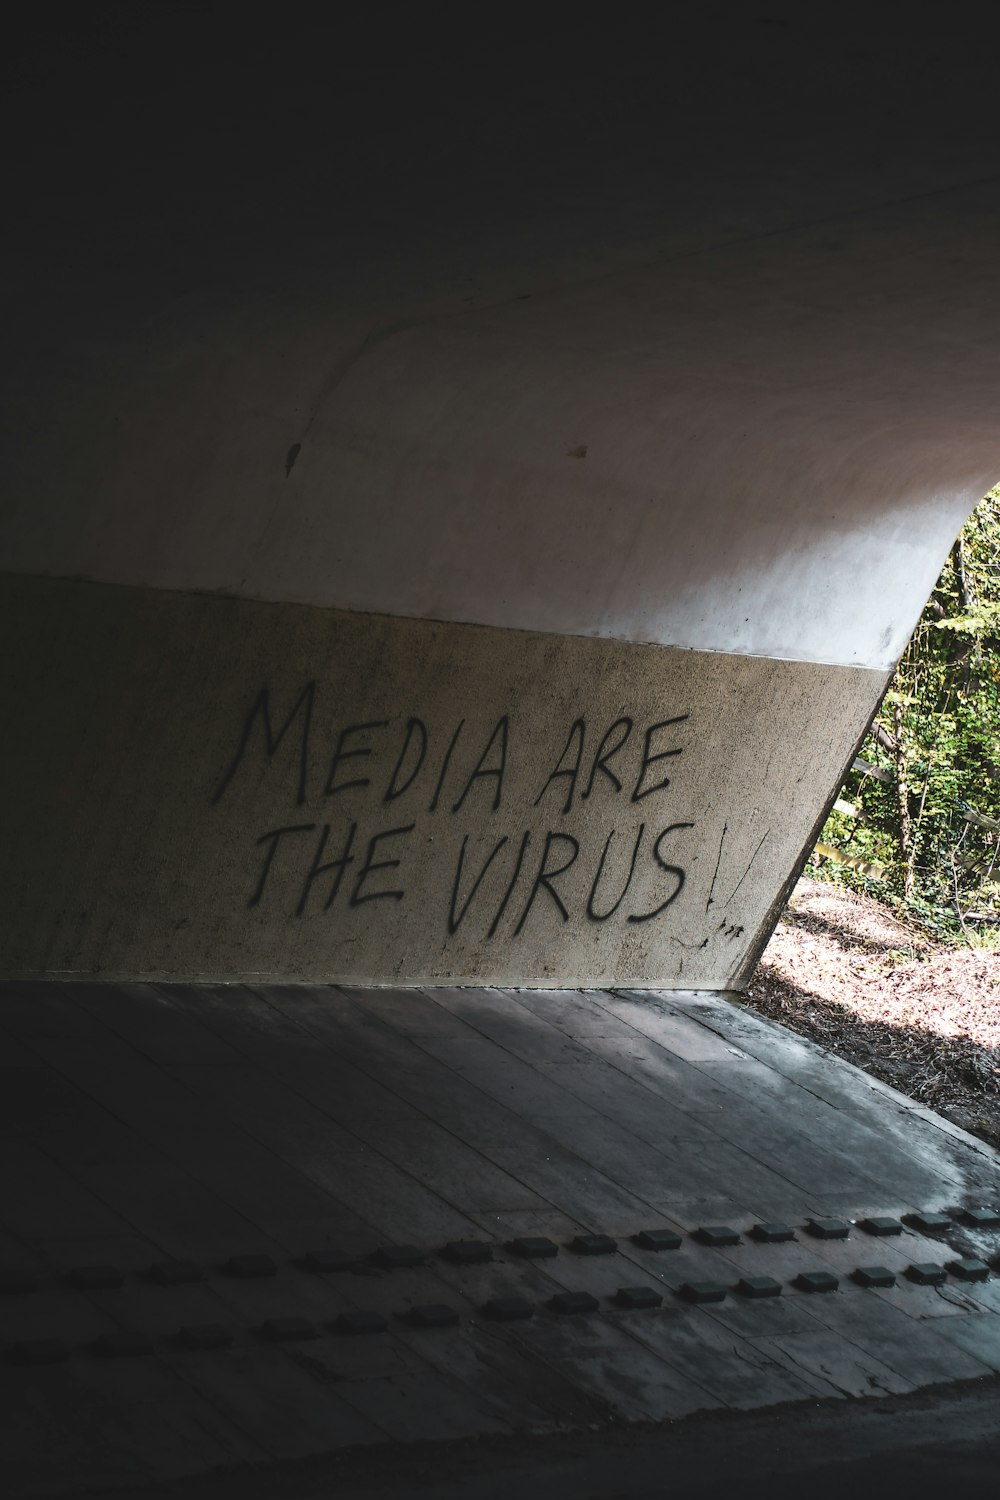 graffiti on the side of a bridge that reads media are the virus